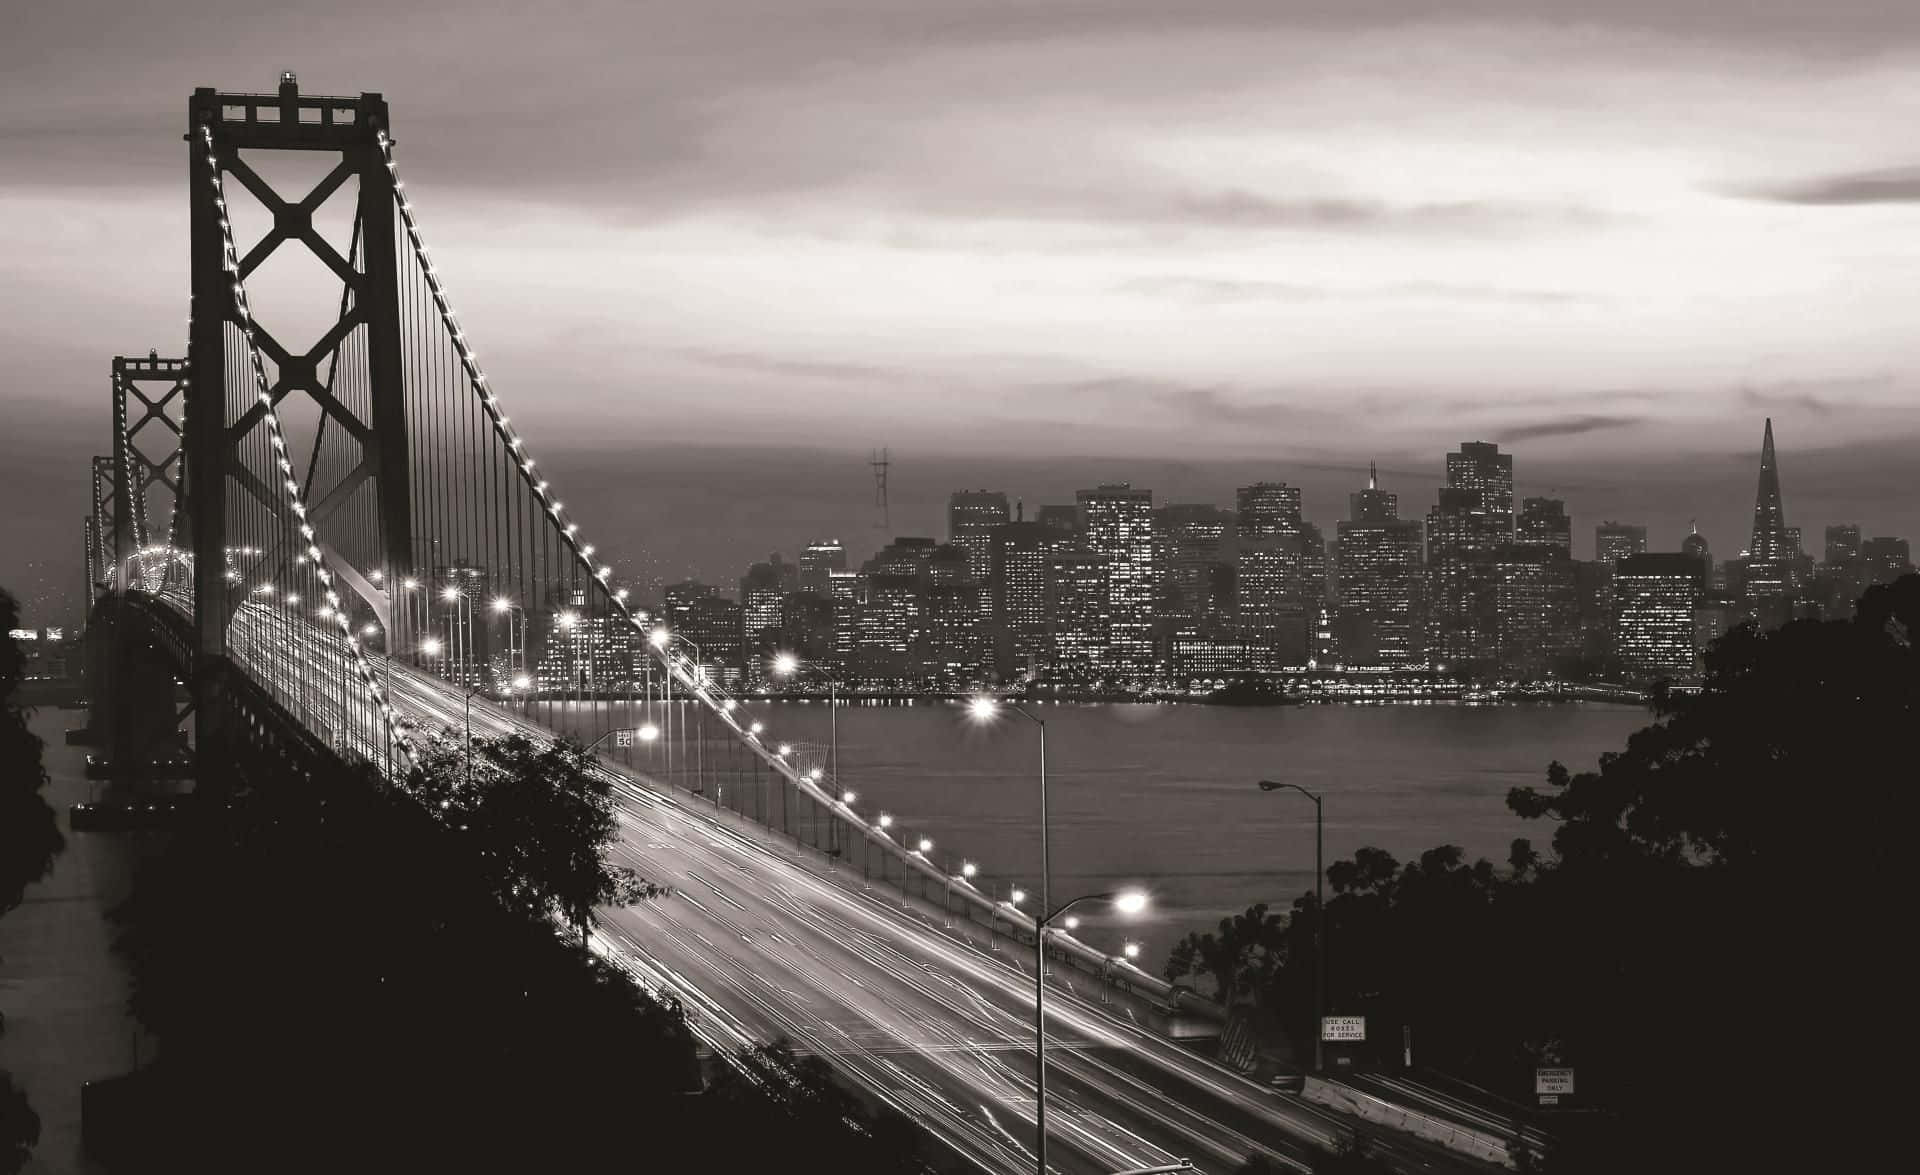 The San Francisco skyline at night as seen in black and white Wallpaper